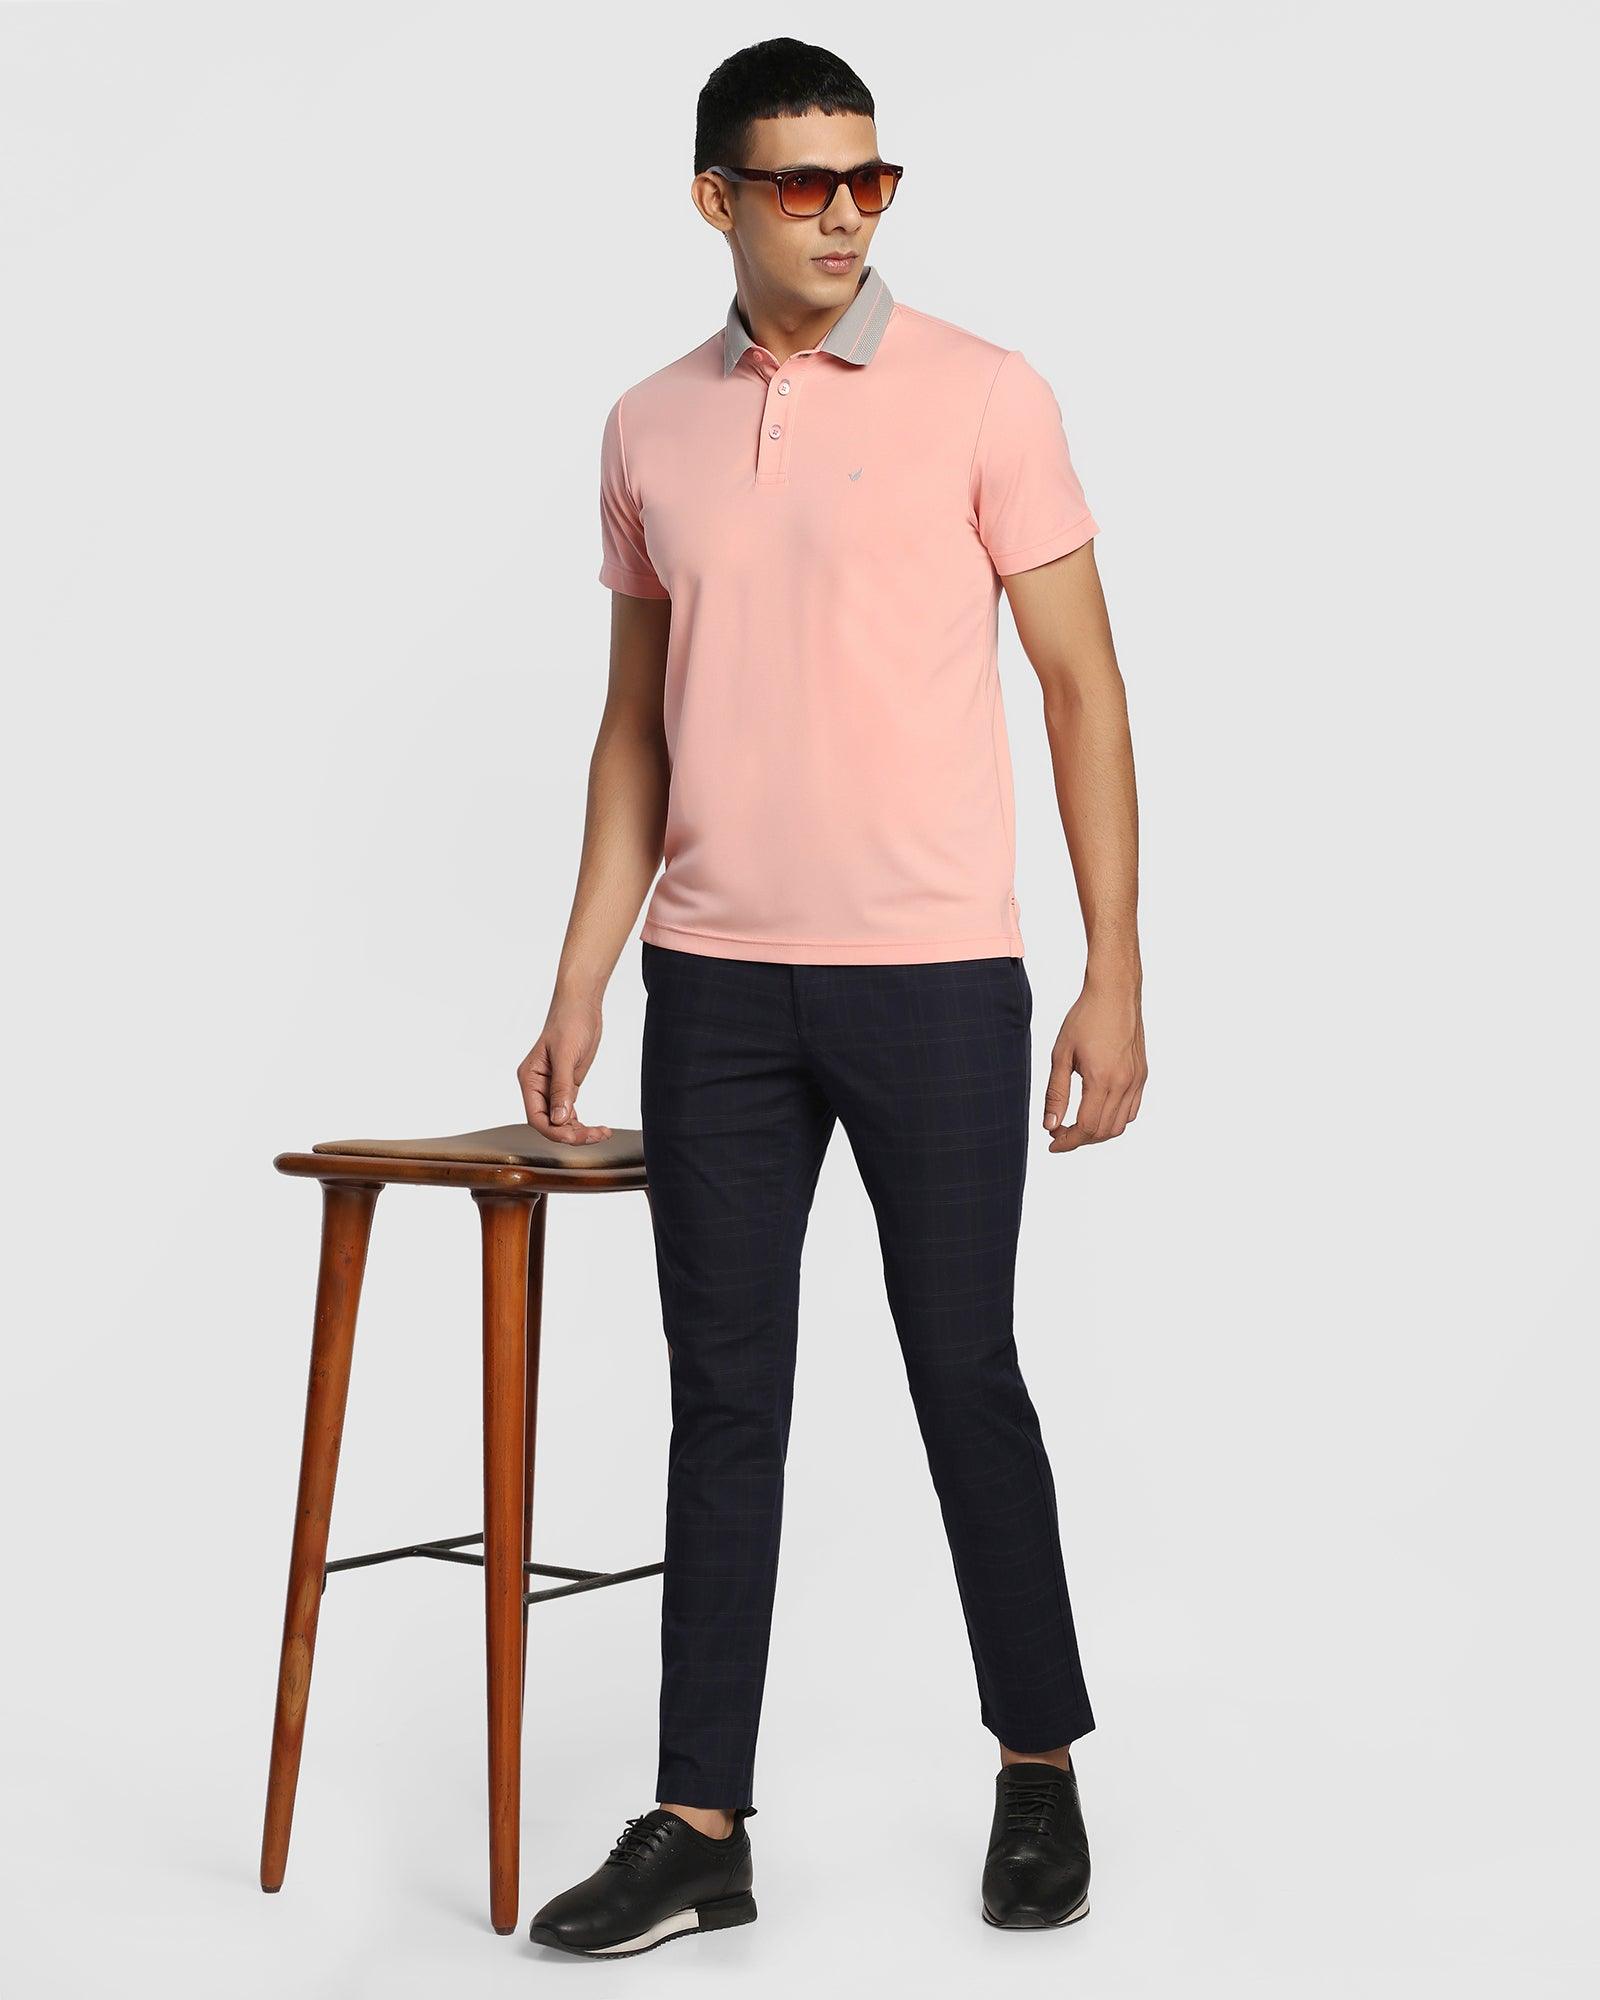 TechPro Polo Pink Solid T-Shirt - Susan